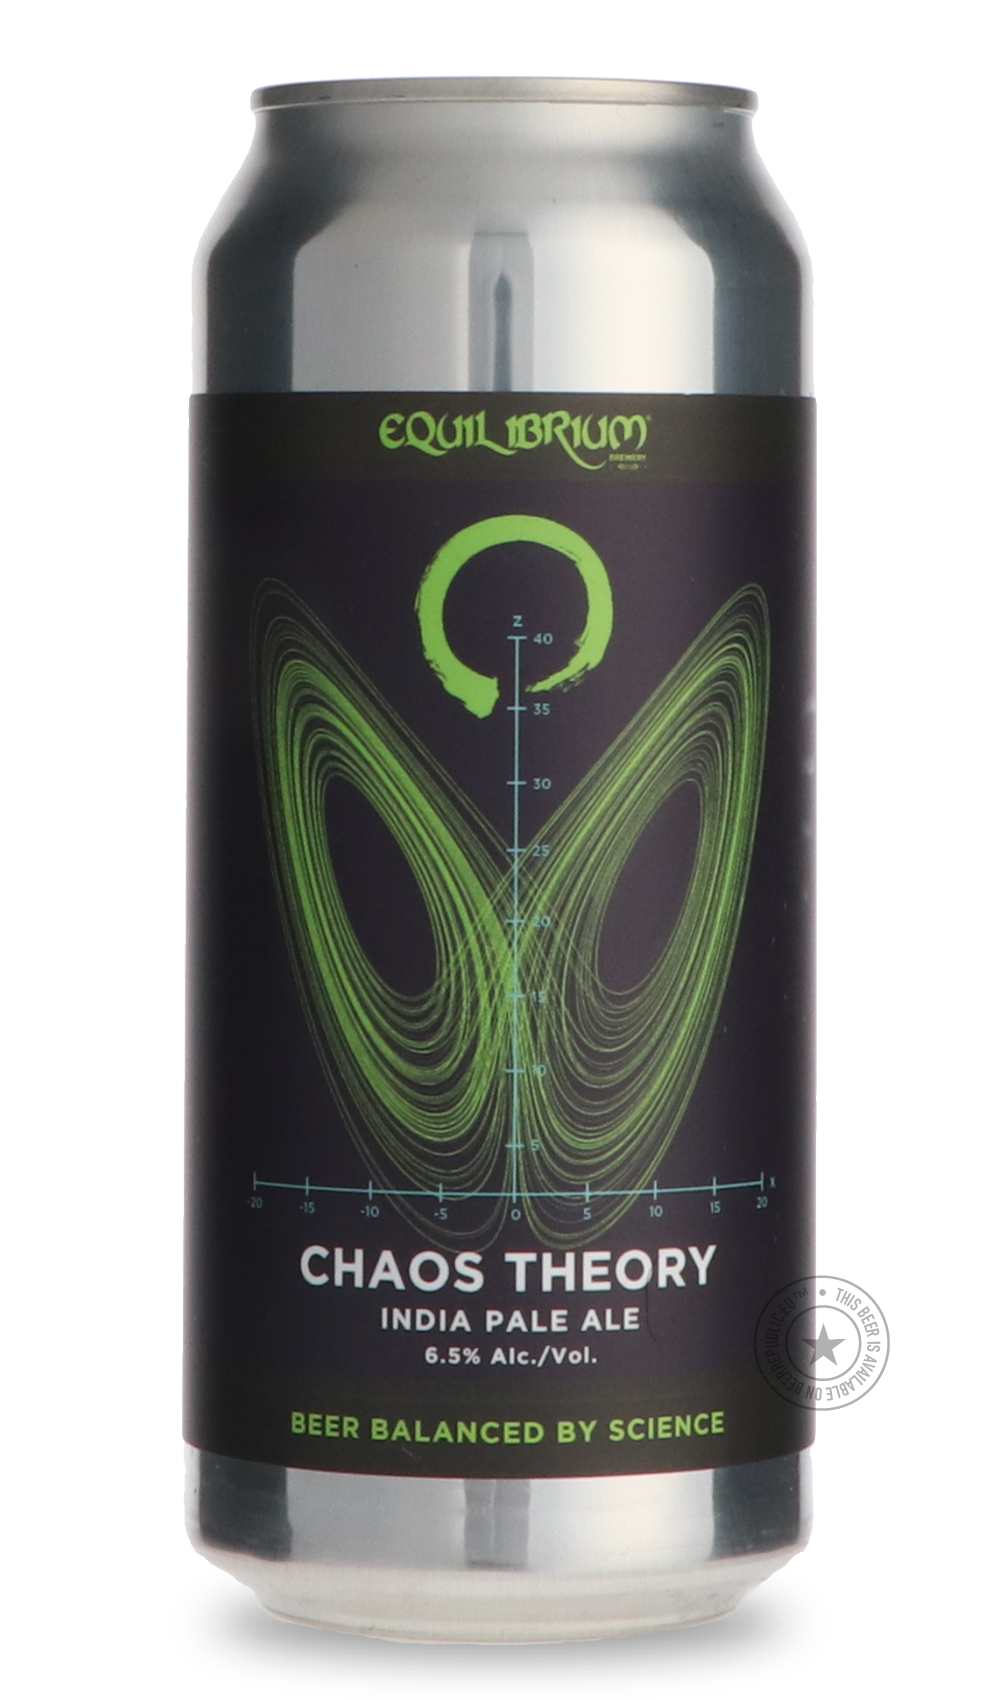 -Equilibrium- Chaos Theory-IPA- Only @ Beer Republic - The best online beer store for American & Canadian craft beer - Buy beer online from the USA and Canada - Bier online kopen - Amerikaans bier kopen - Craft beer store - Craft beer kopen - Amerikanisch bier kaufen - Bier online kaufen - Acheter biere online - IPA - Stout - Porter - New England IPA - Hazy IPA - Imperial Stout - Barrel Aged - Barrel Aged Imperial Stout - Brown - Dark beer - Blond - Blonde - Pilsner - Lager - Wheat - Weizen - Amber - Barley